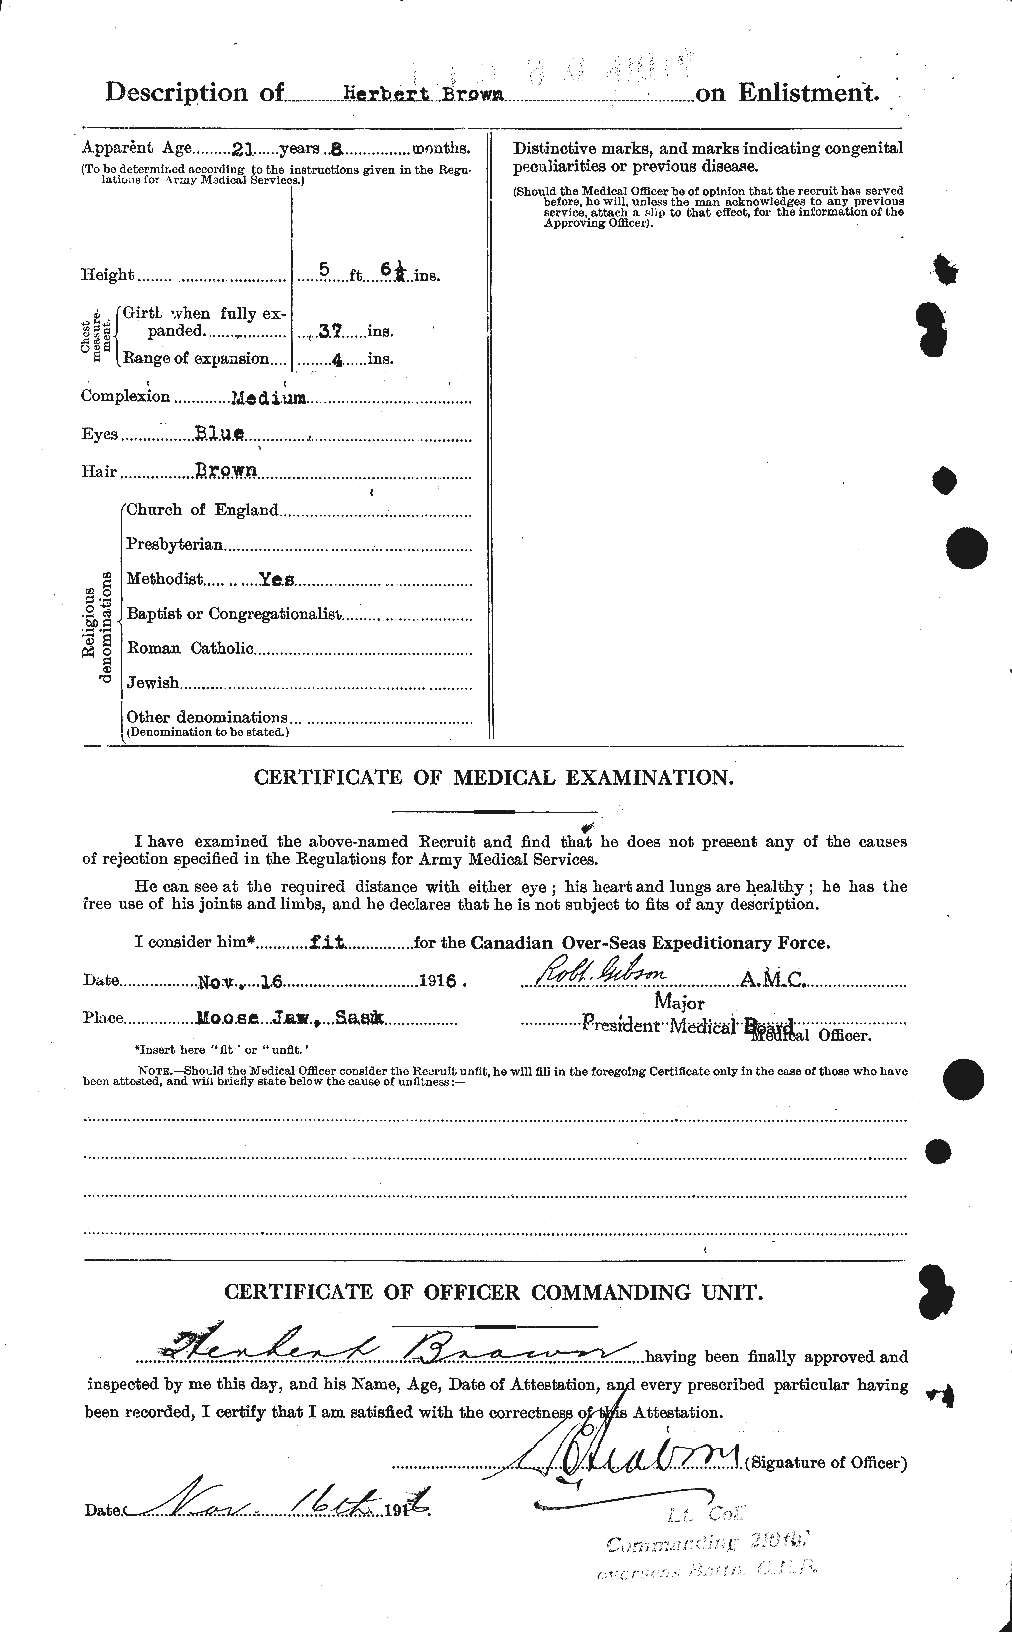 Personnel Records of the First World War - CEF 265552b